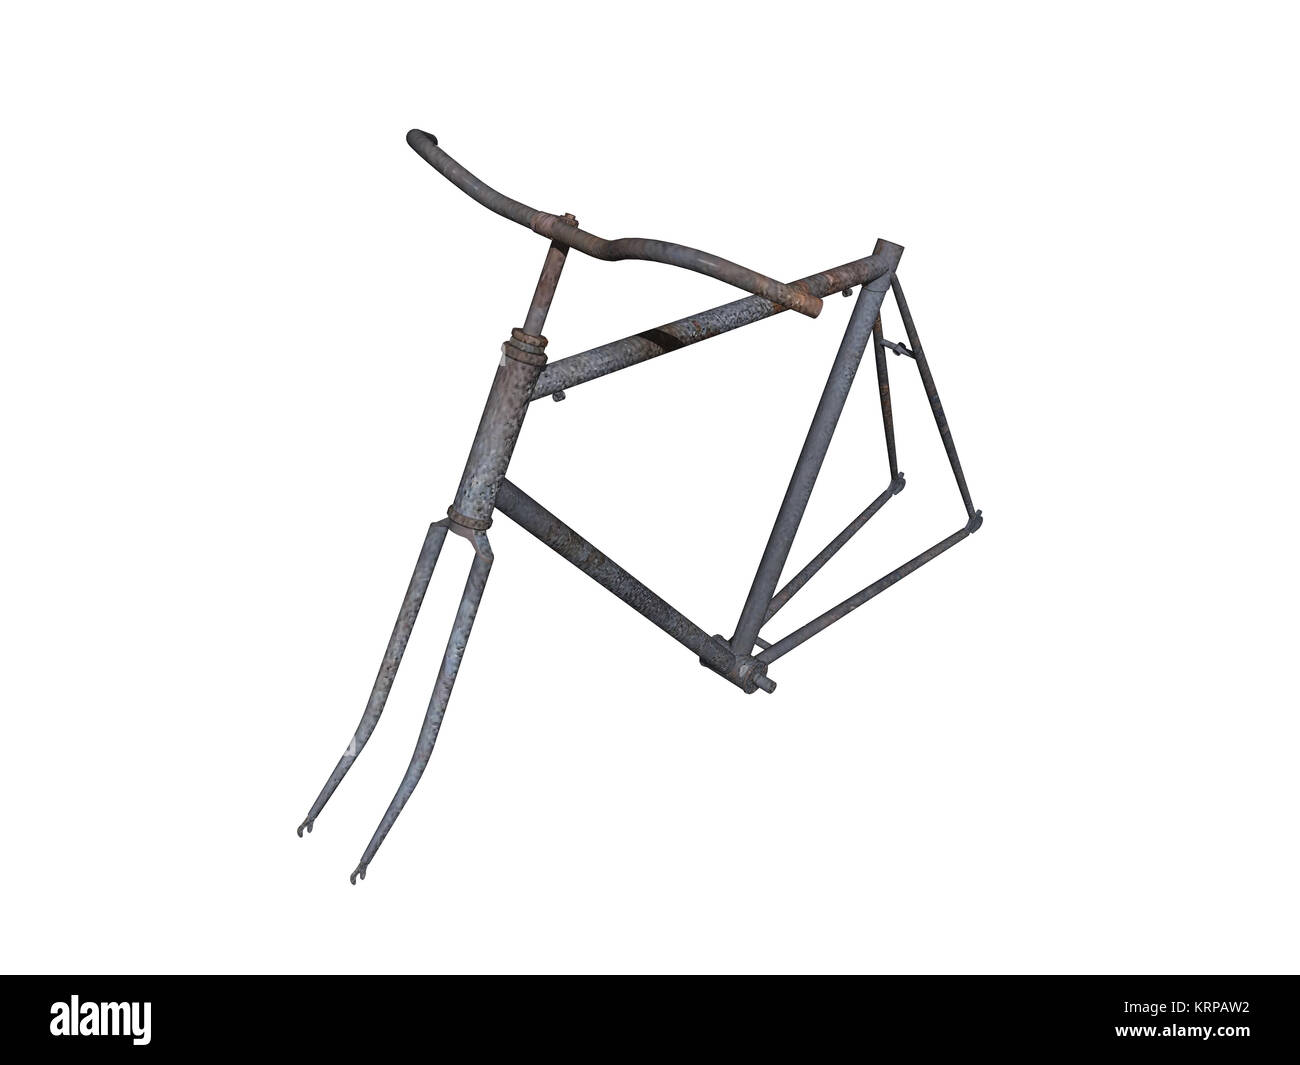 rusty bicycle frame isolated Stock Photo